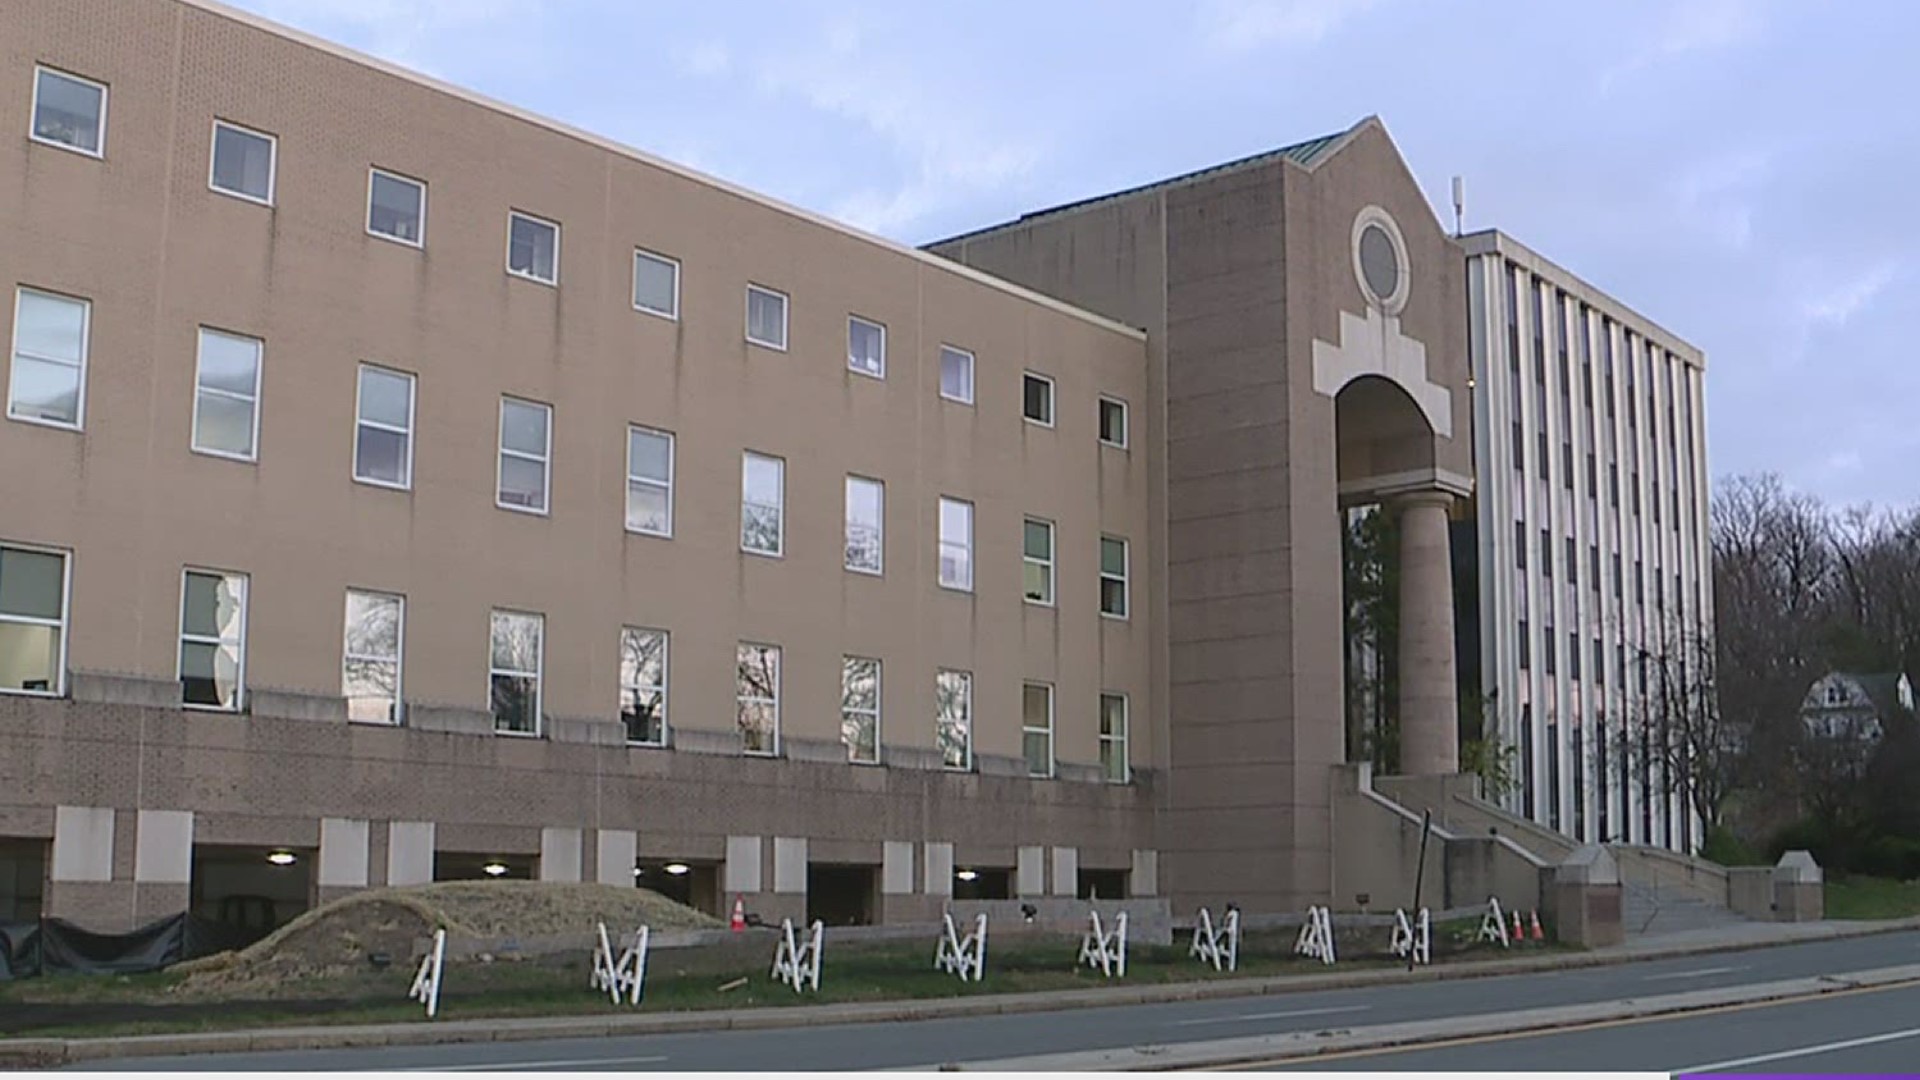 Luzerne County's Central Court will be closed until Monday, November 30 because of positive cases of COVID-19.